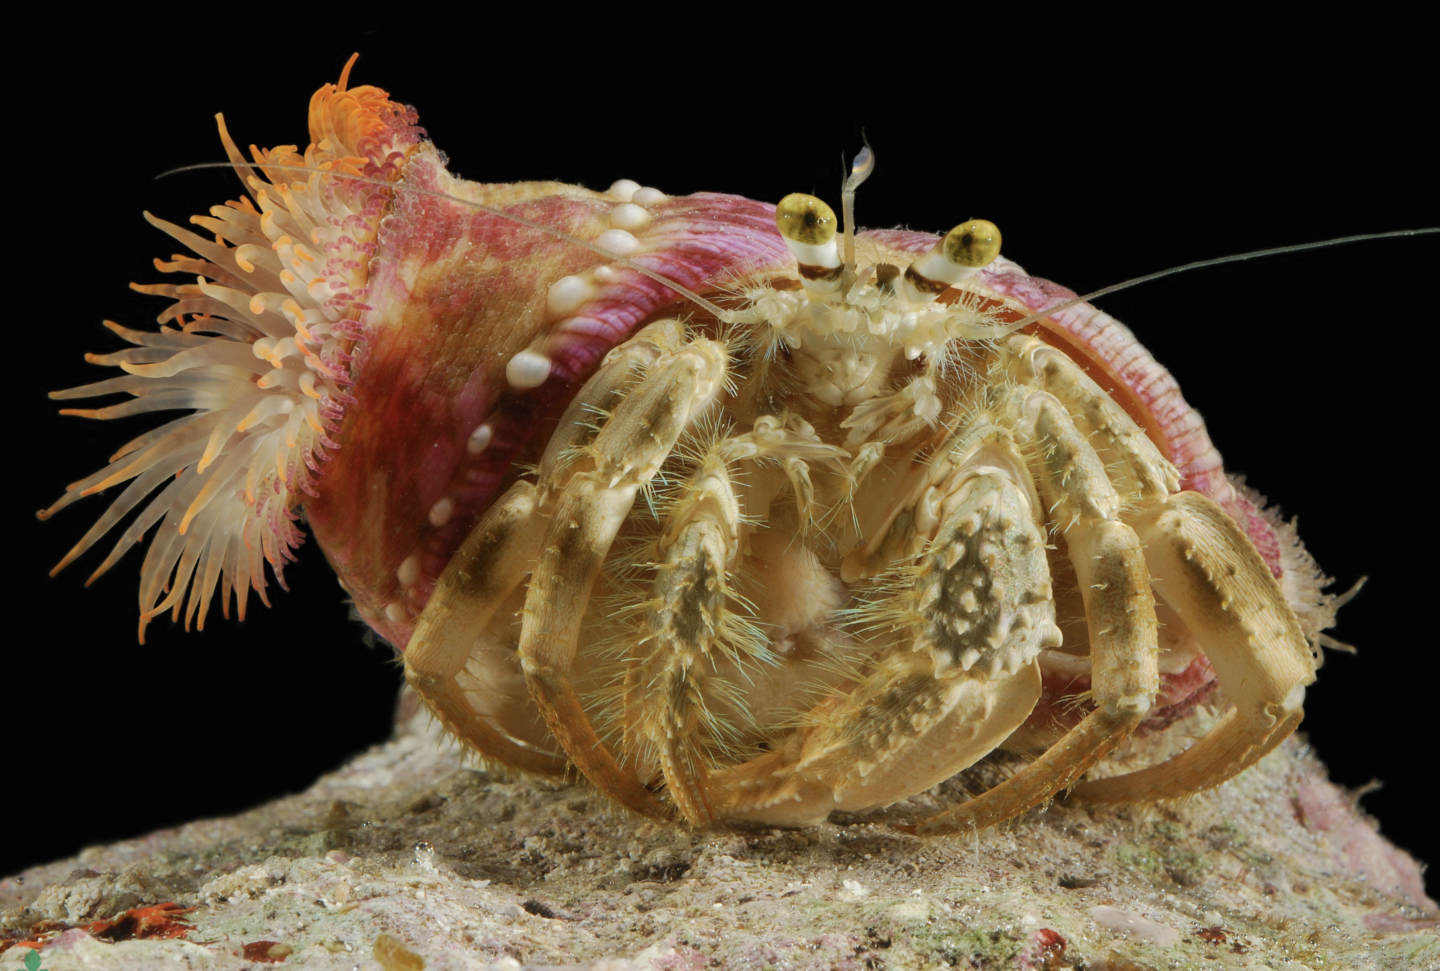 Symbiosis between sea anemone and hermit crab